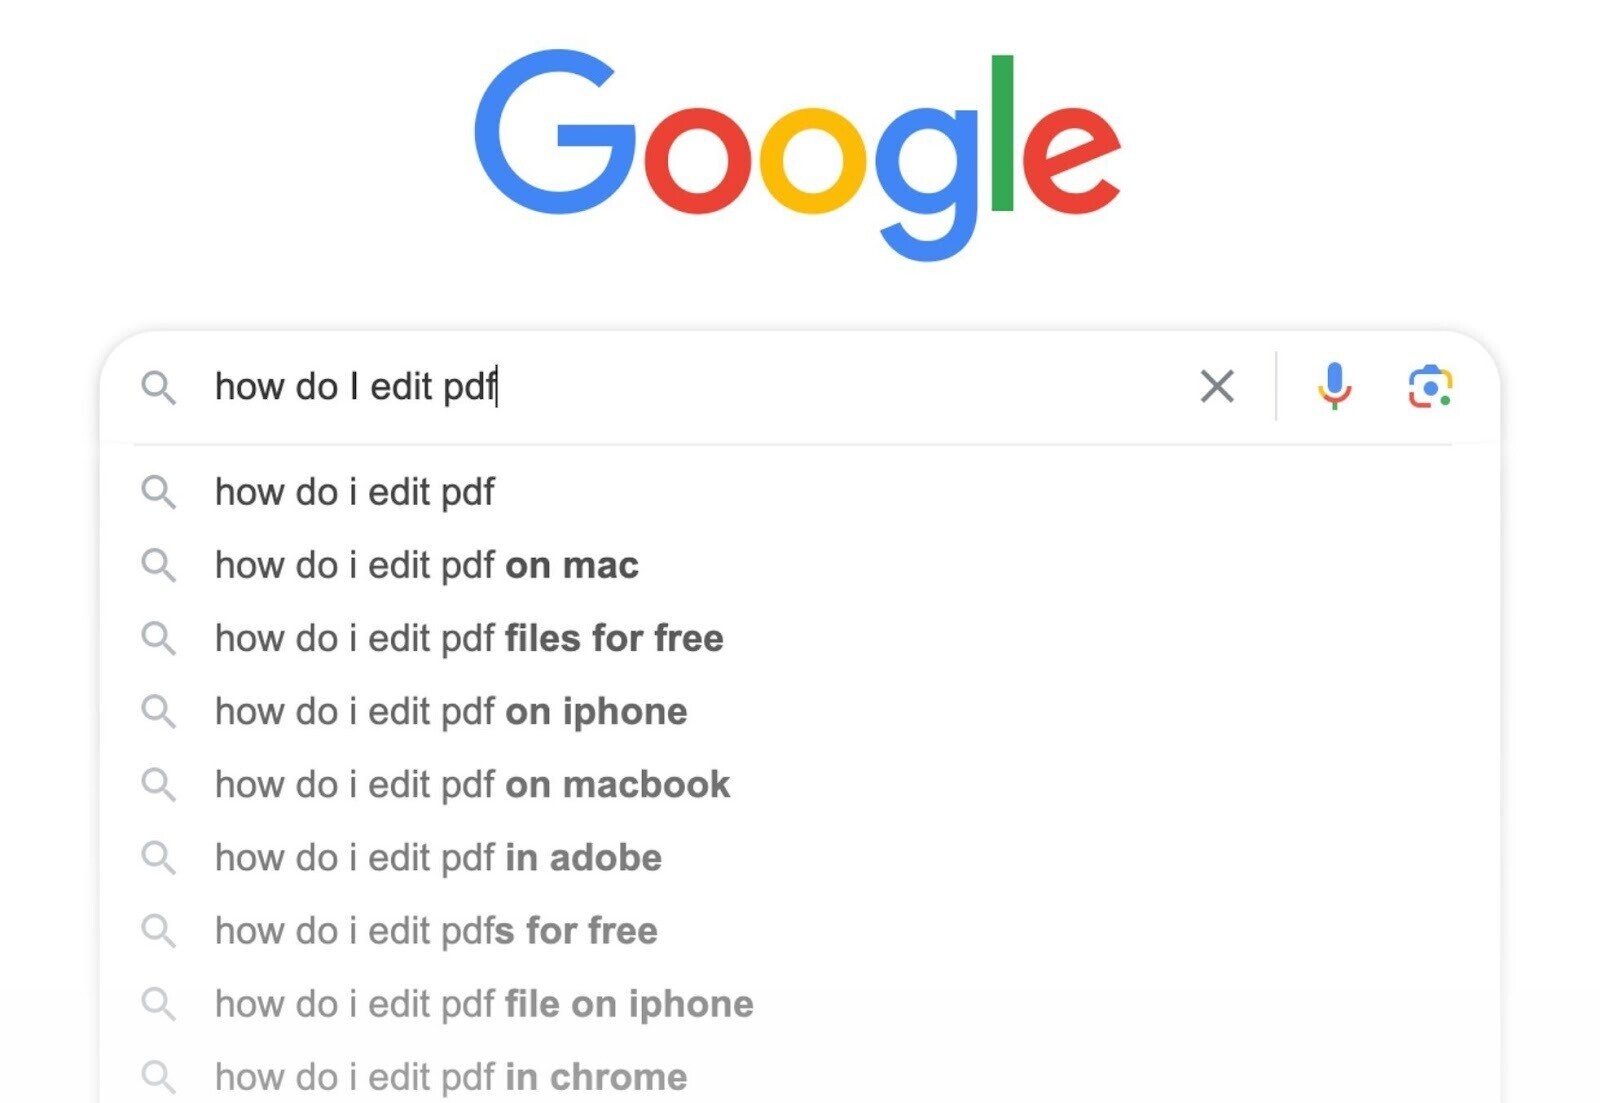 an example of Google autocomplete ideas when searching for "how do I edit pdf"